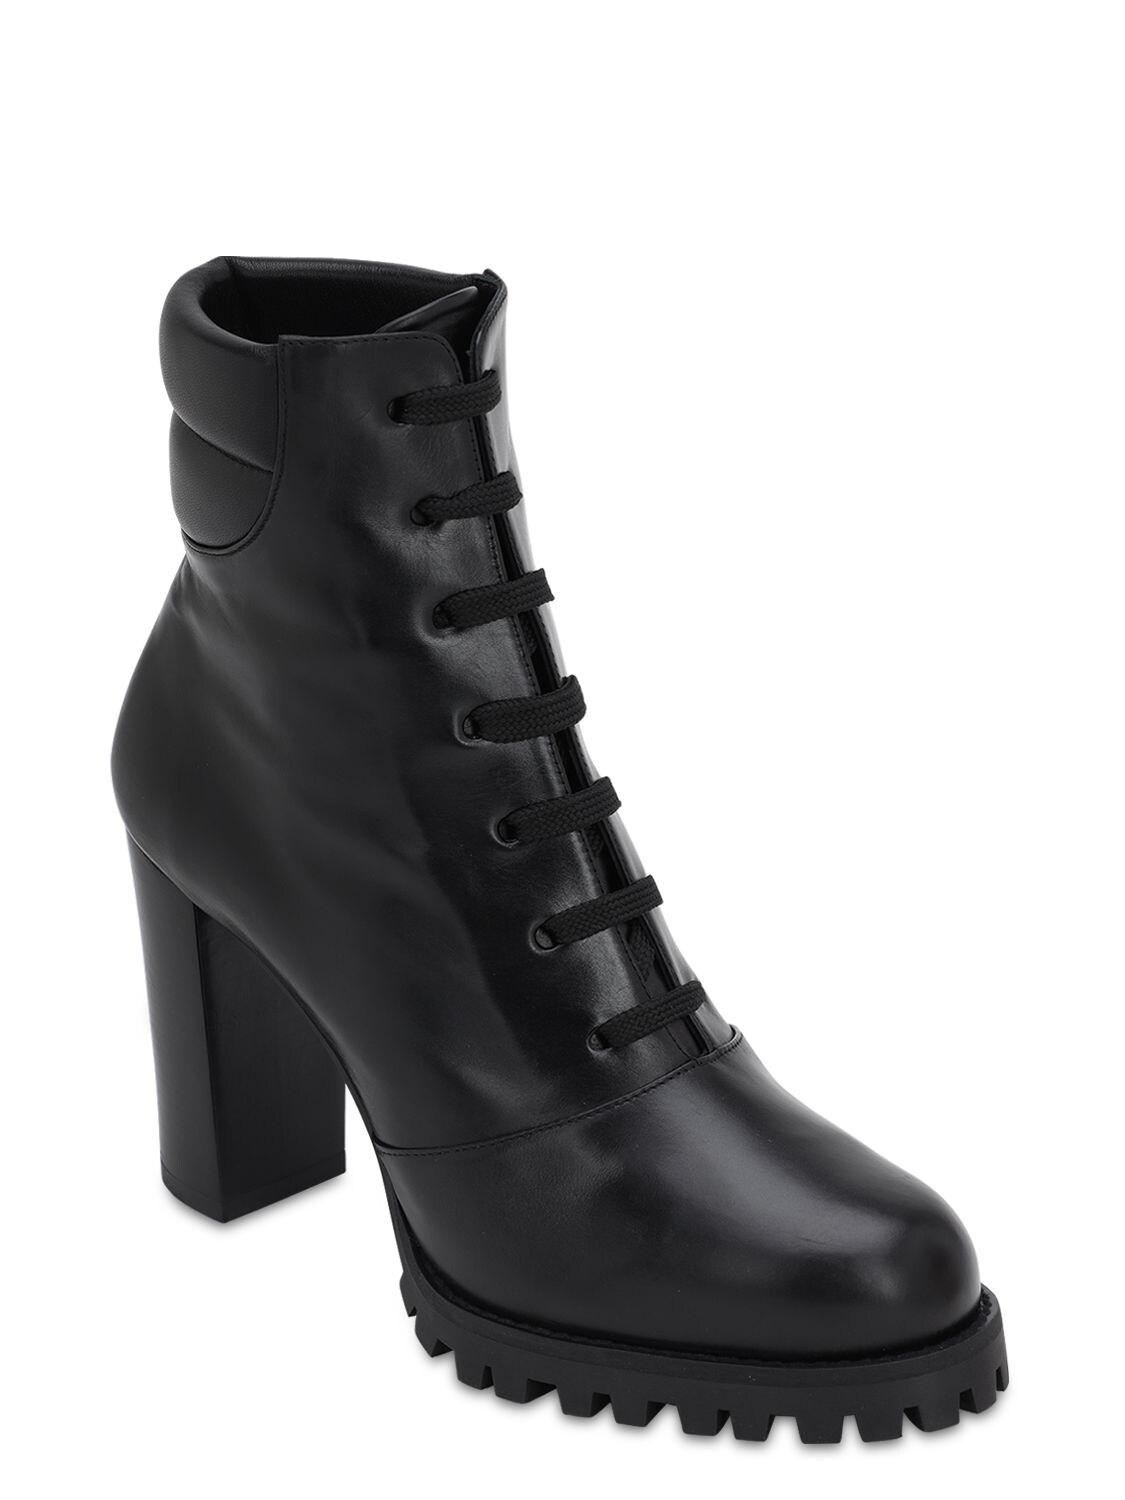 Stuart Weitzman 90mm Cyler Leather Ankle Boots in Black - Lyst